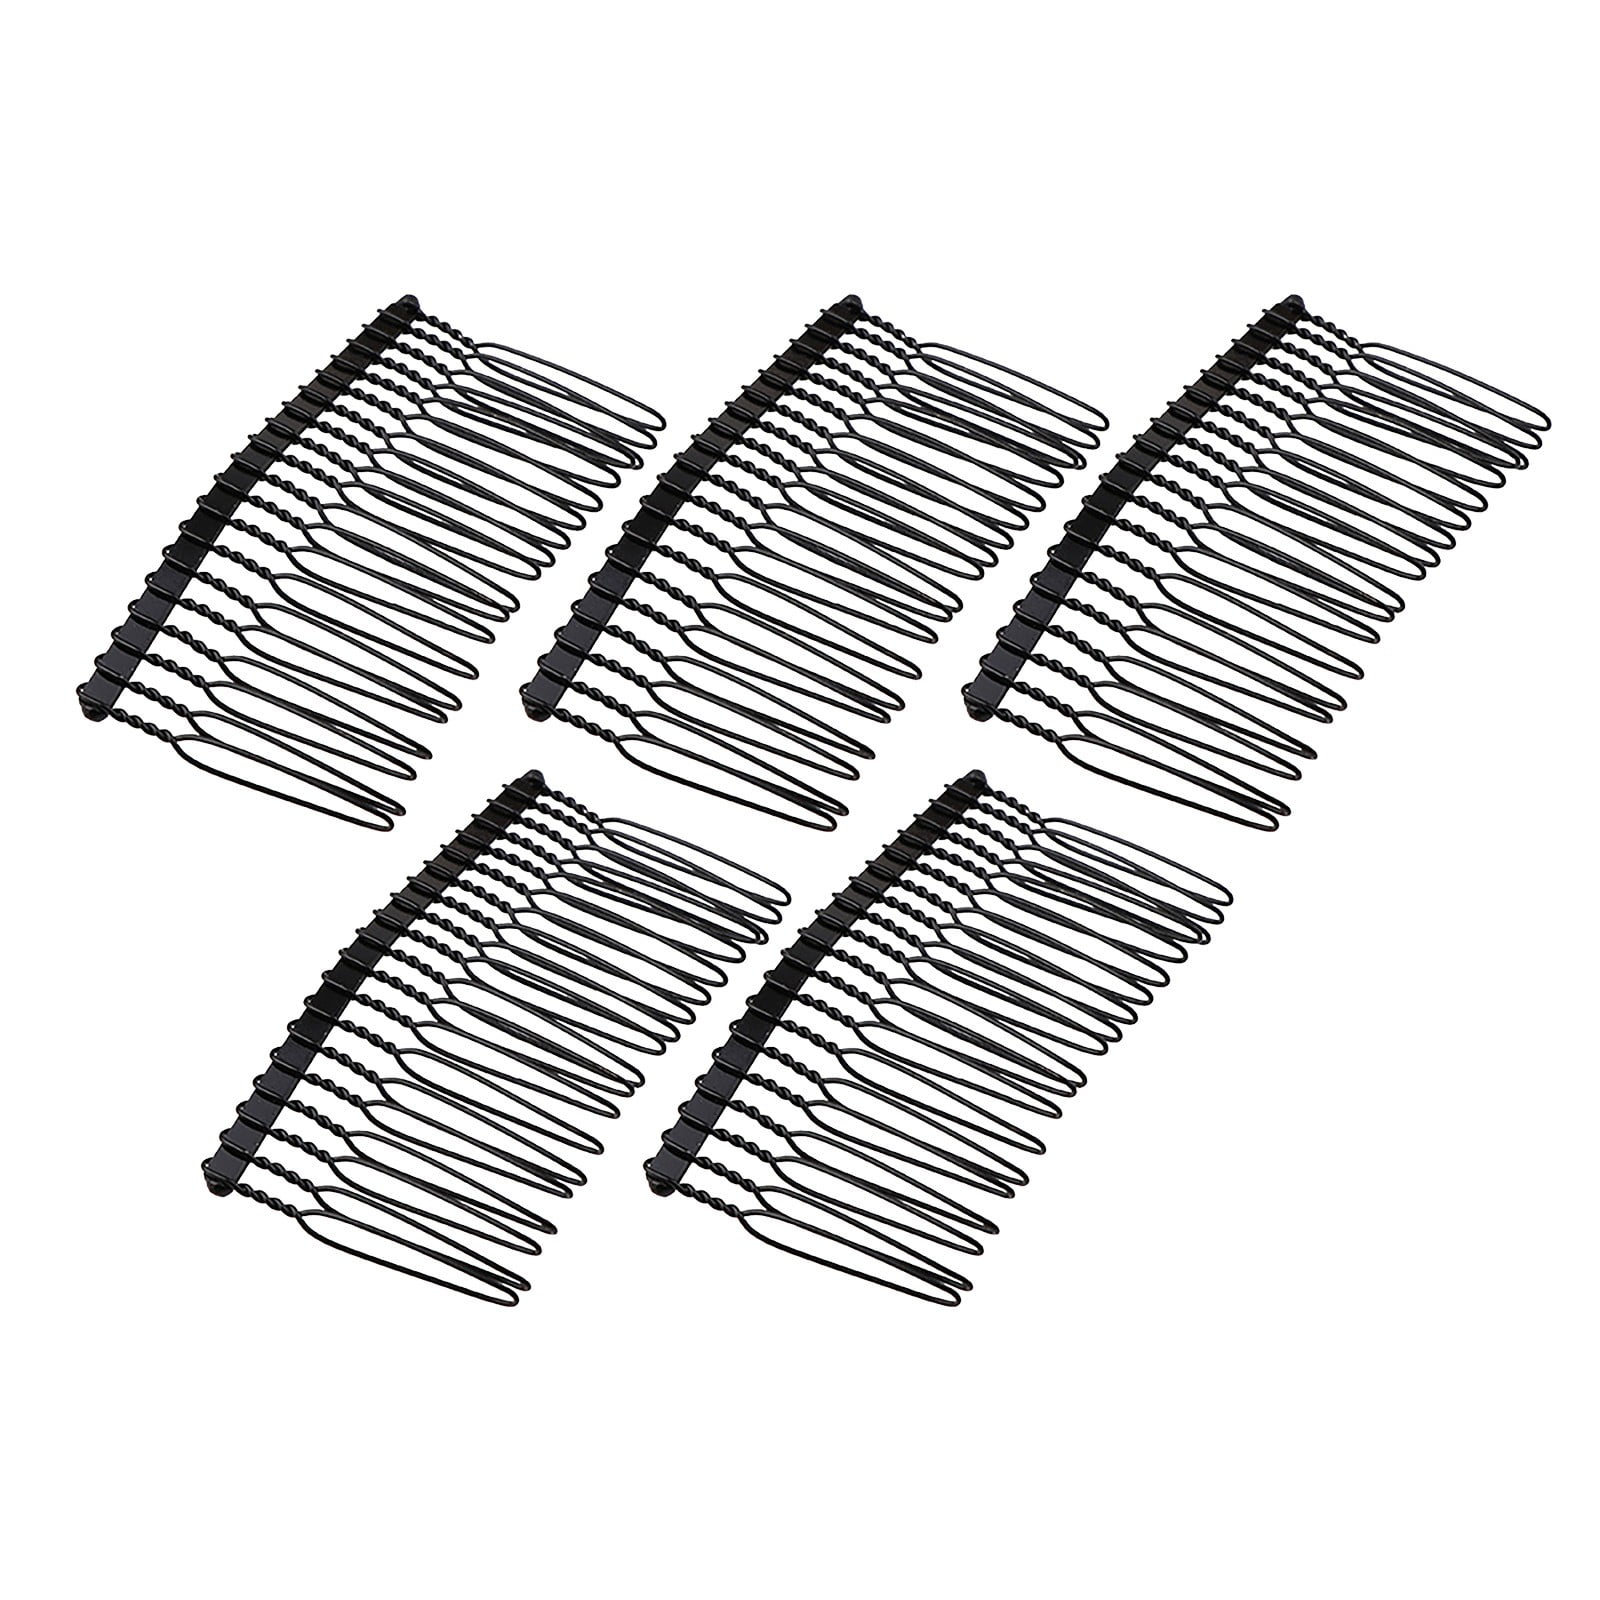 Anohuyho Hair Styling Pins & Accessories - 242 Piece Set with Bobby Pin  Case & Comb Tools - Hair Accessories Organiser for Women, Dancers & Hair